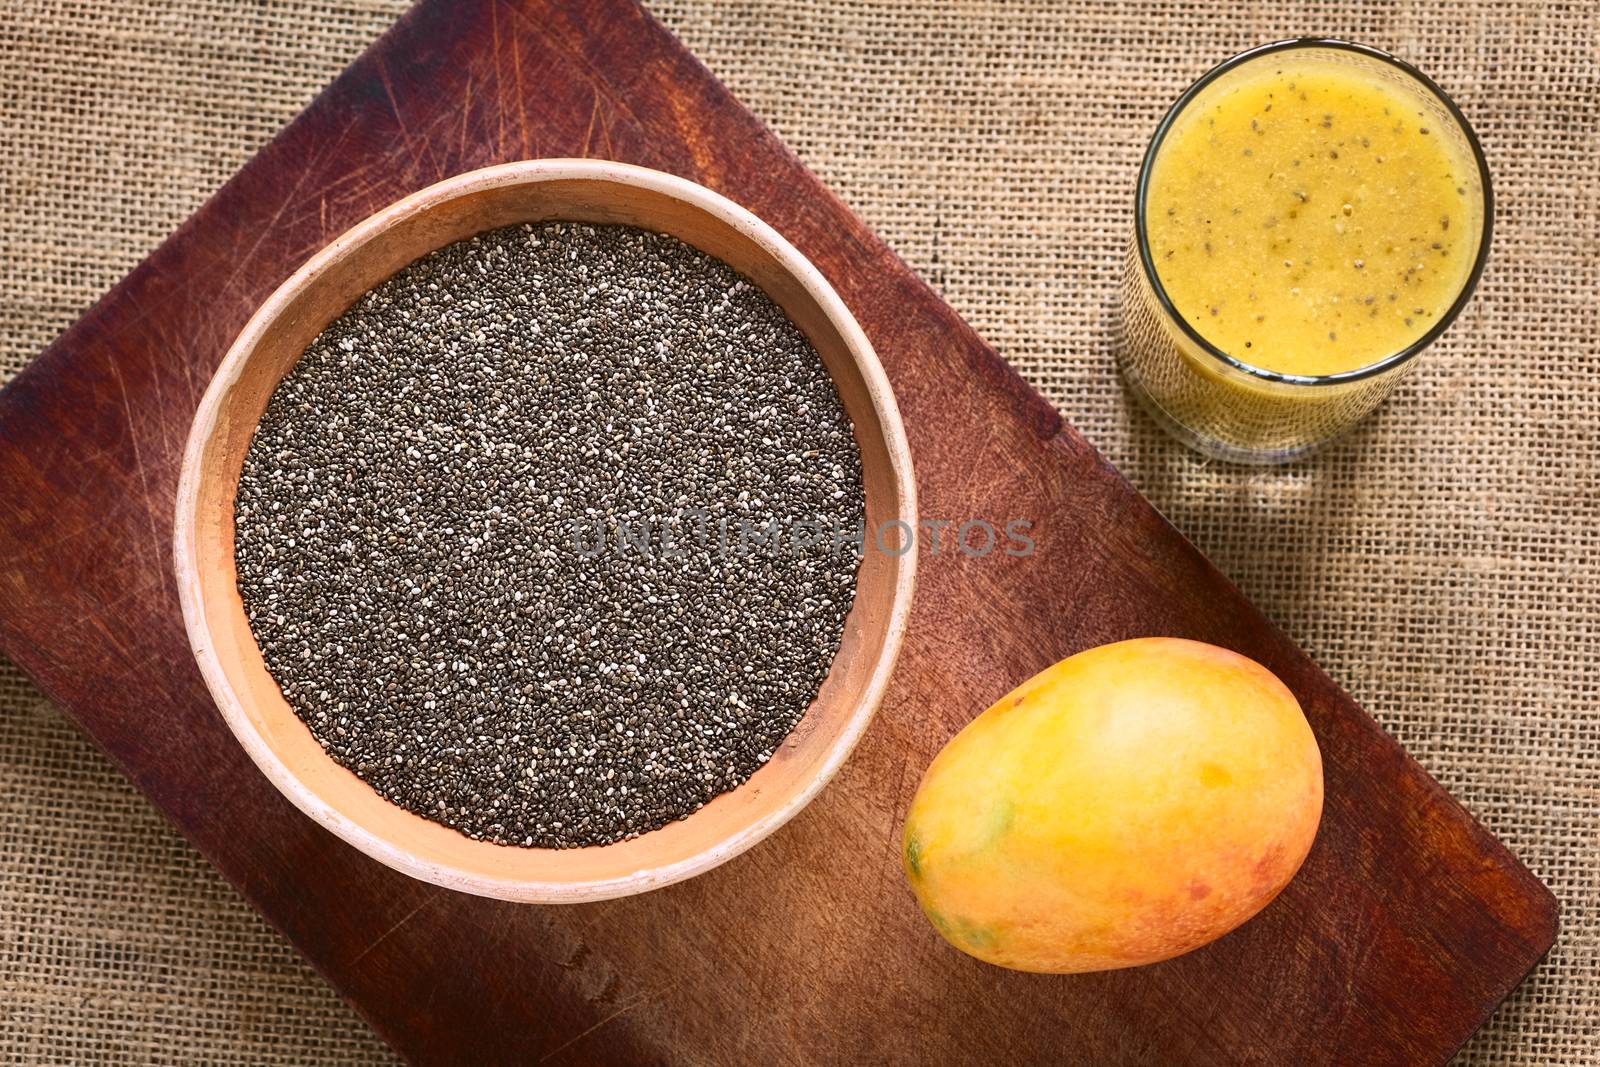 Overhead shot of chia seeds (lat. Salvia hispanica) in clay bowl with mango and mango-chia juice photographed with natural light. Chia seeds are considered a superfood containing proteins, omega fats, minerals and antioxidants